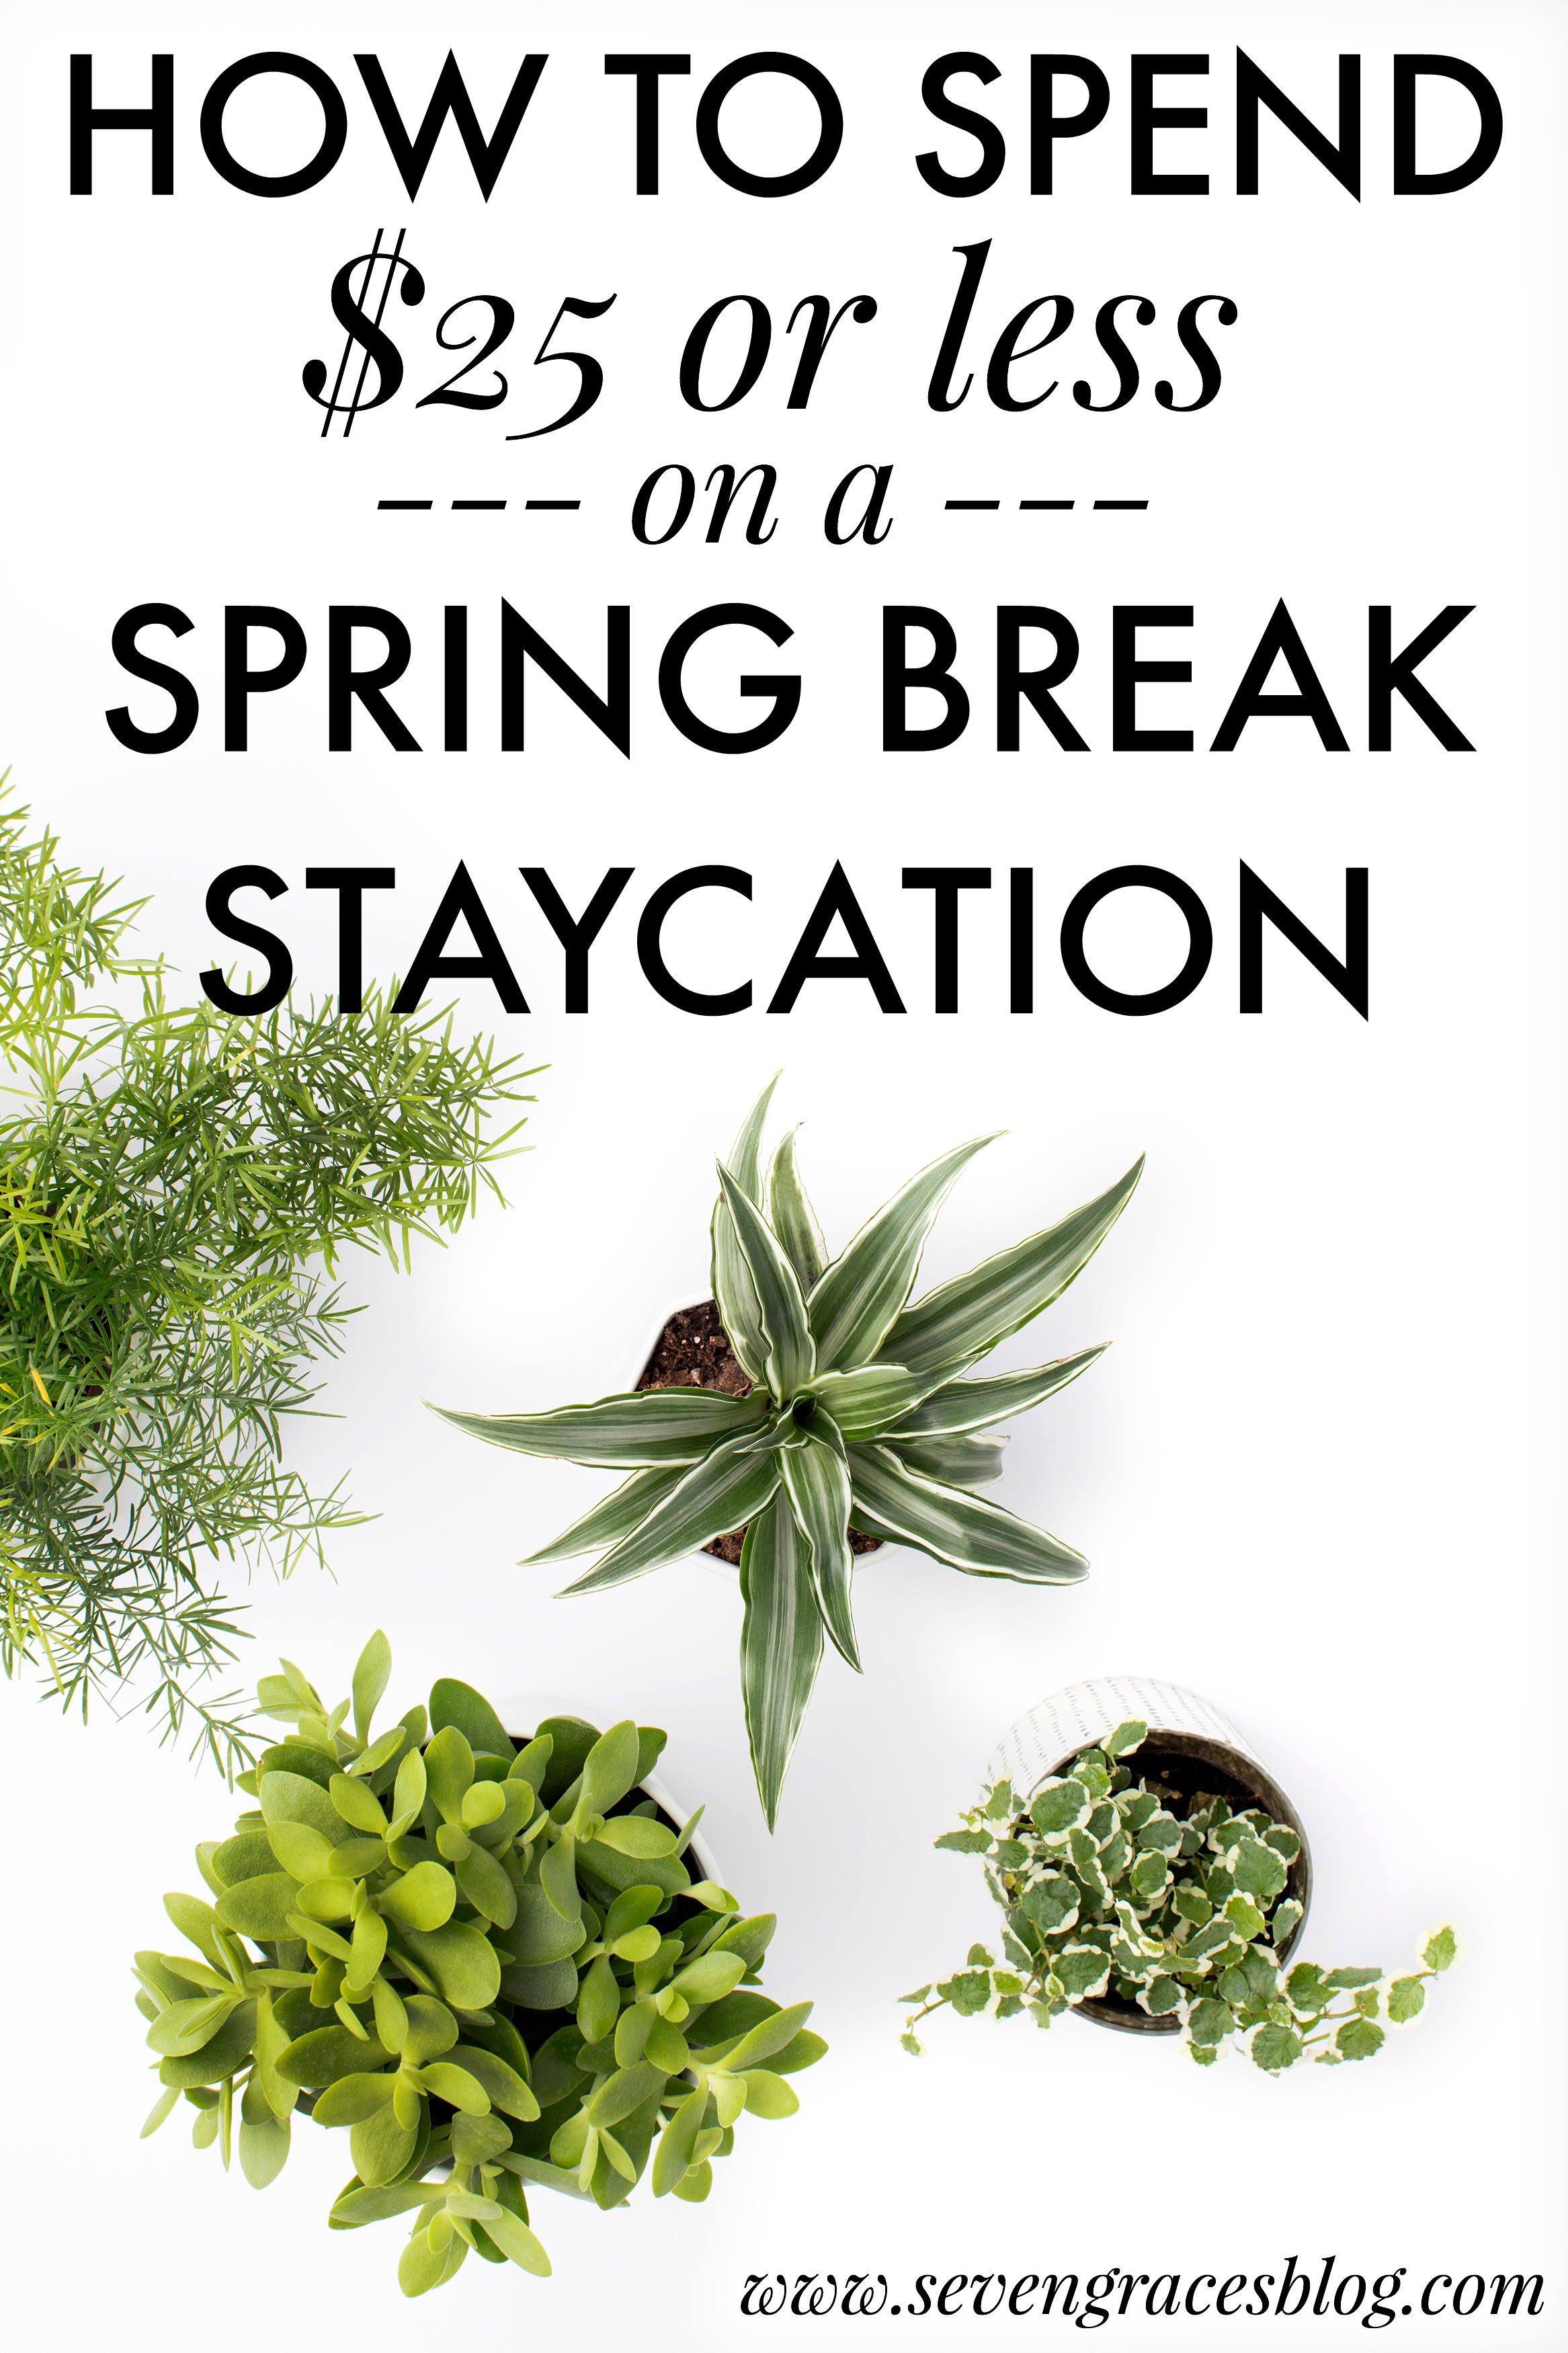 5 Ways to Have an Awesome Spring Break Staycation for $25 or Less. Great tips to have a fun staycation with your family while not breaking the bank. Inexpensive ways to have fun on Spring Break. 